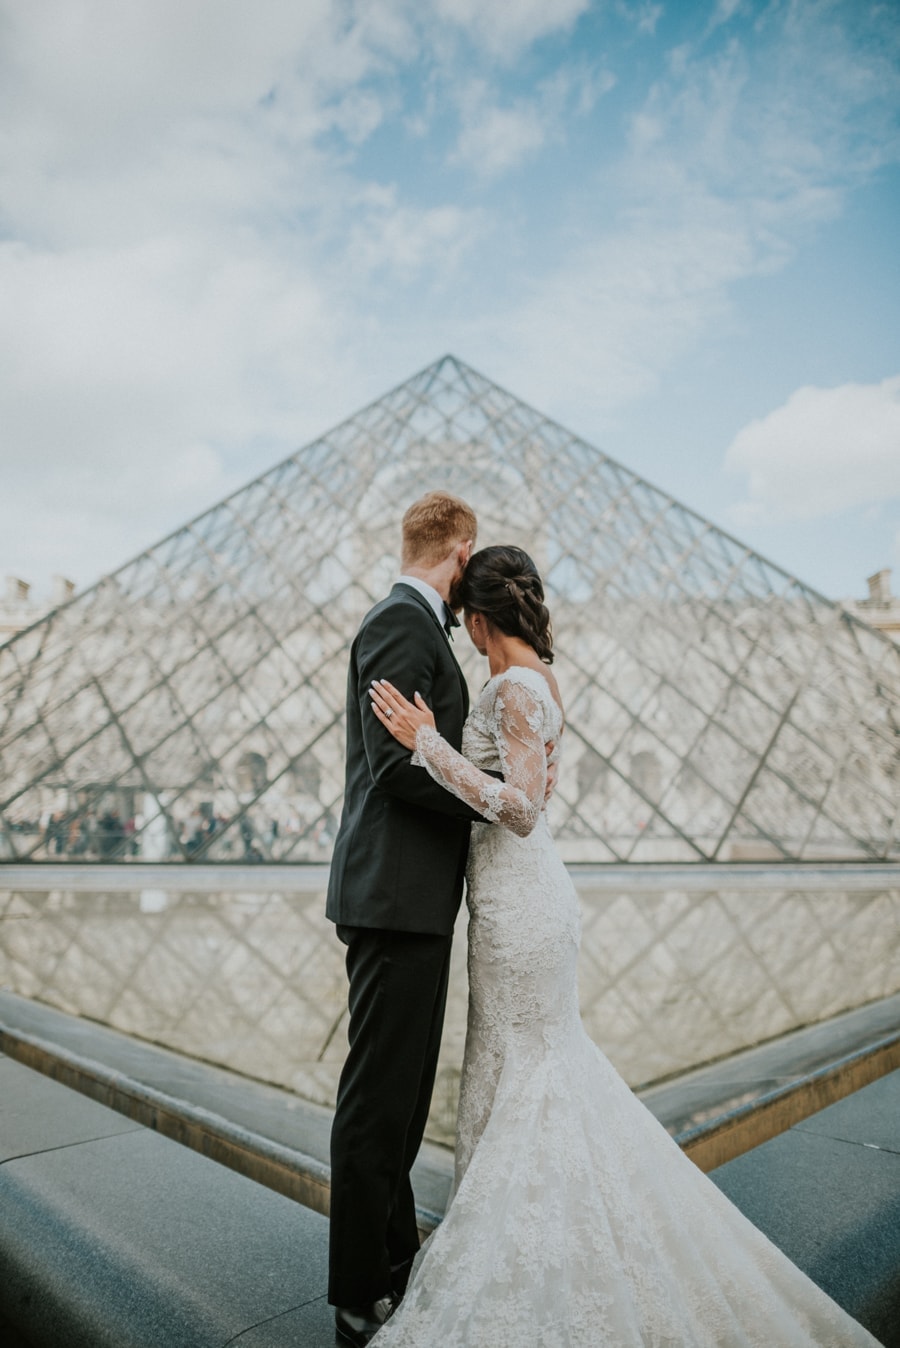 The Top 13 to Consider When Planning a Destination Wedding - What I Learned!